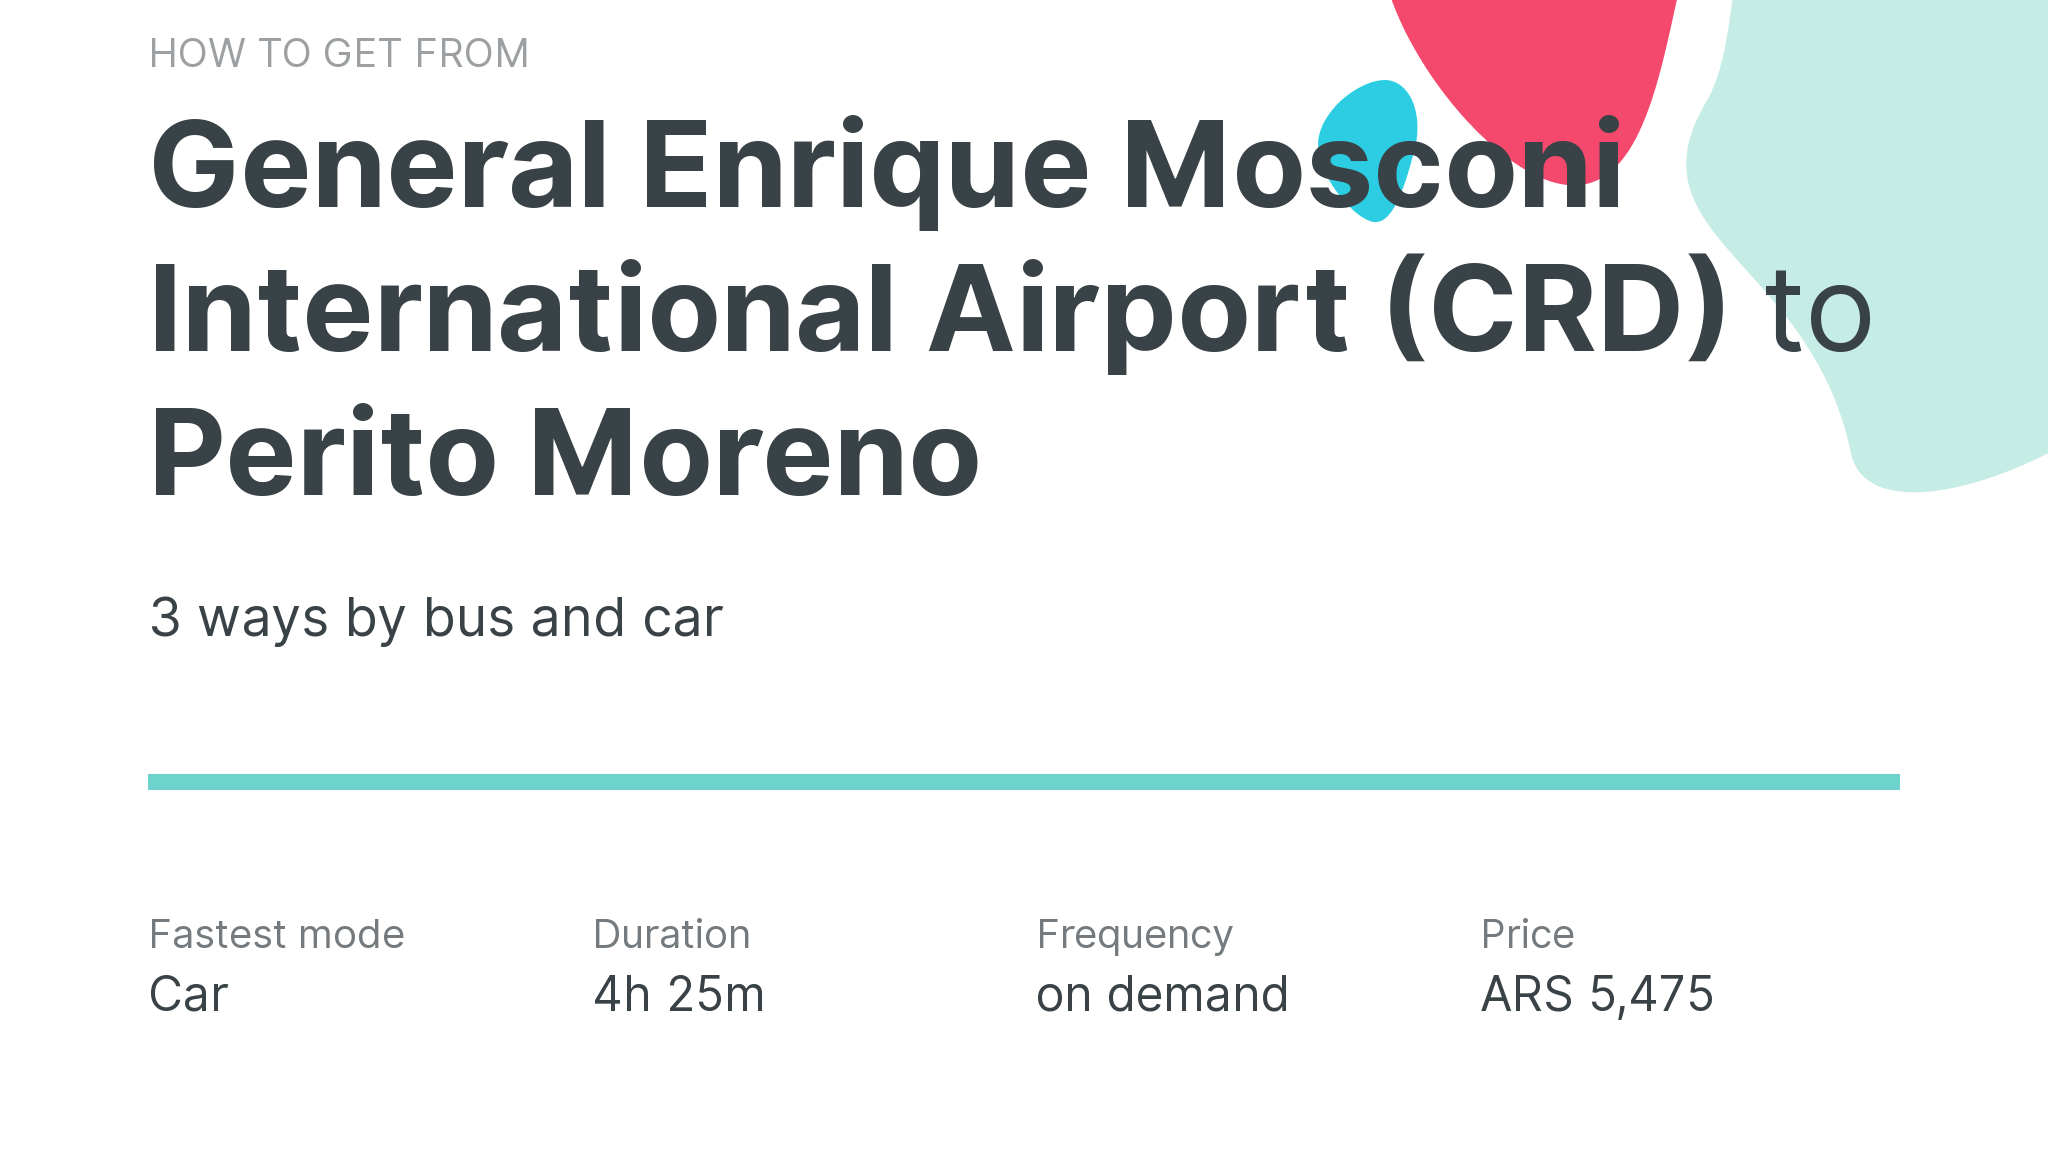 How do I get from General Enrique Mosconi International Airport (CRD) to Perito Moreno